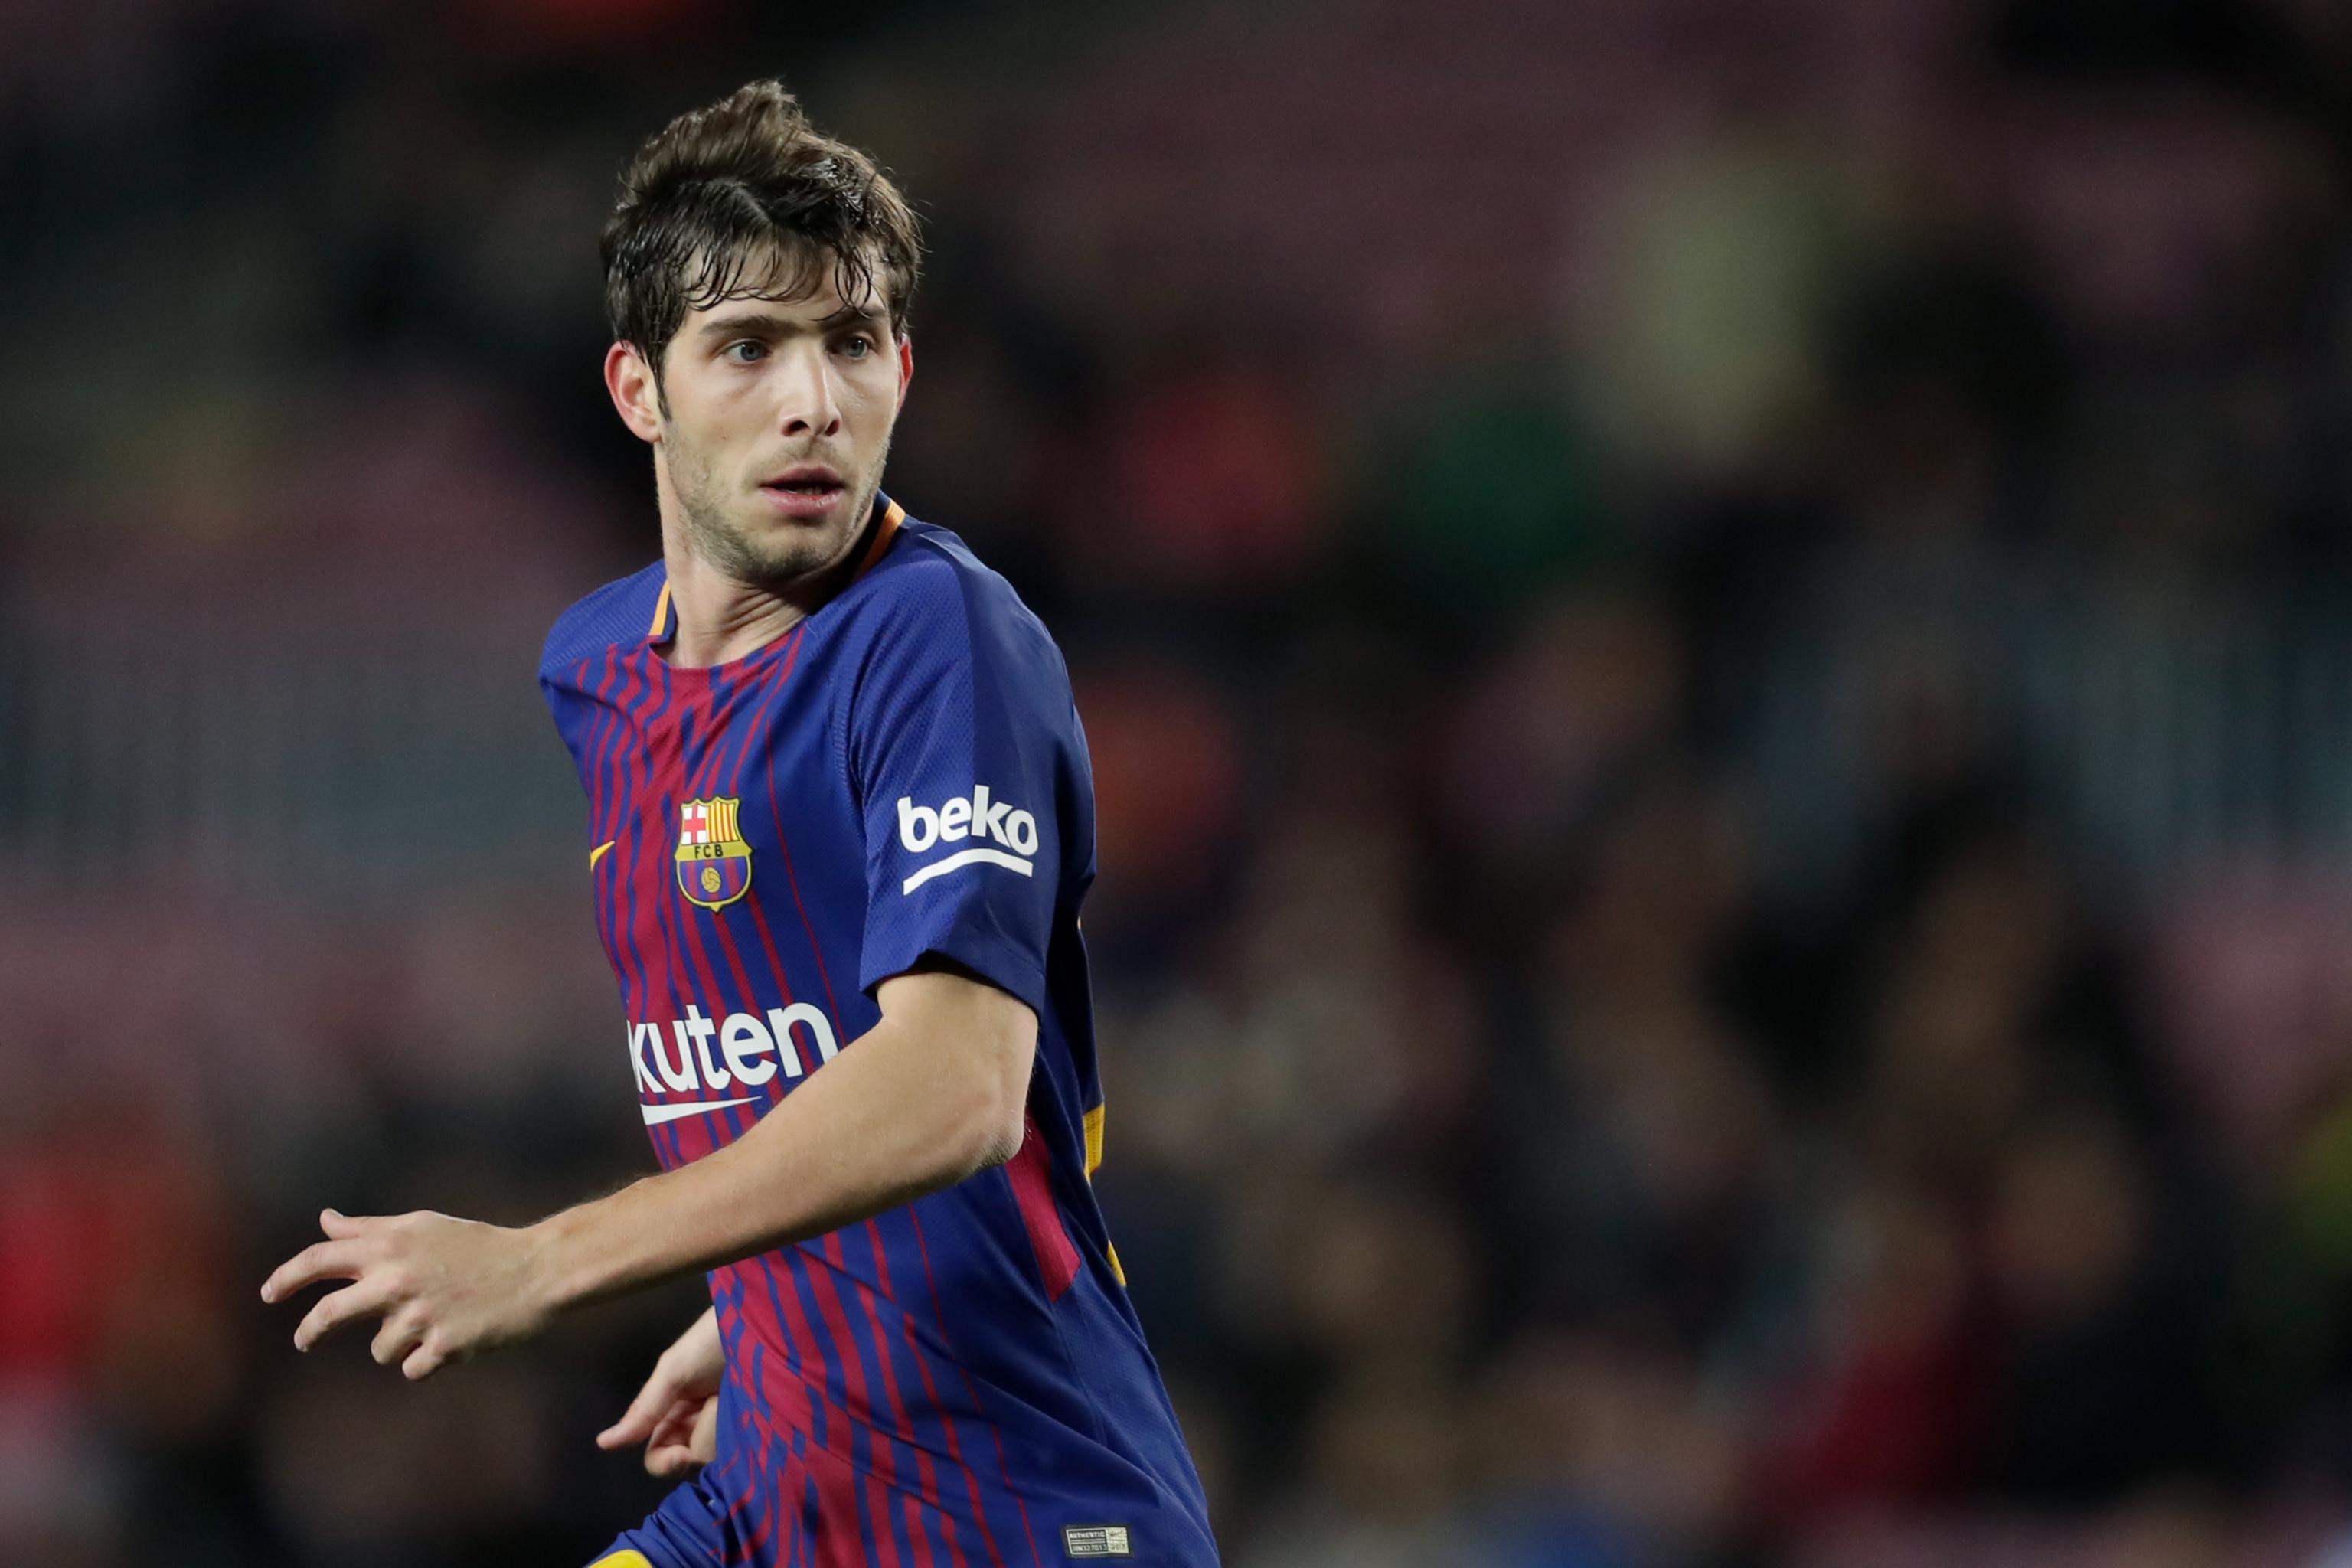 Sergi Roberto expected to sign new Barcelona contract imminently - Current State of Sergi Roberto at Barcelona